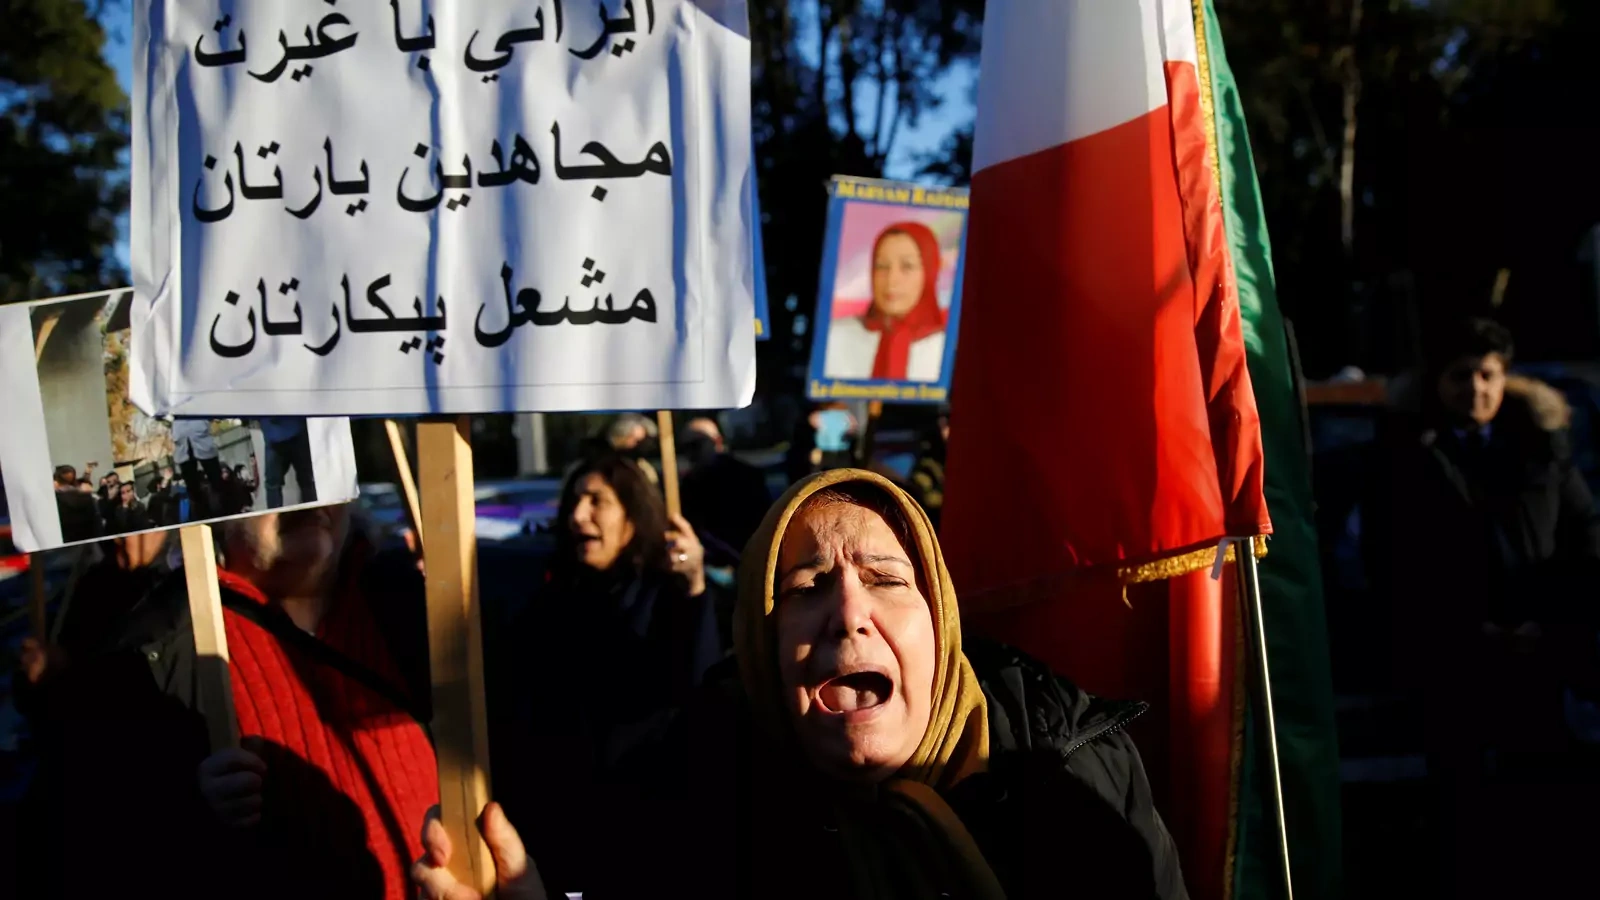 Opponents of Iranian President Hassan Rouhani hold a protest outside the Iranian embassy in Rome, Italy, on January 2, 2018.